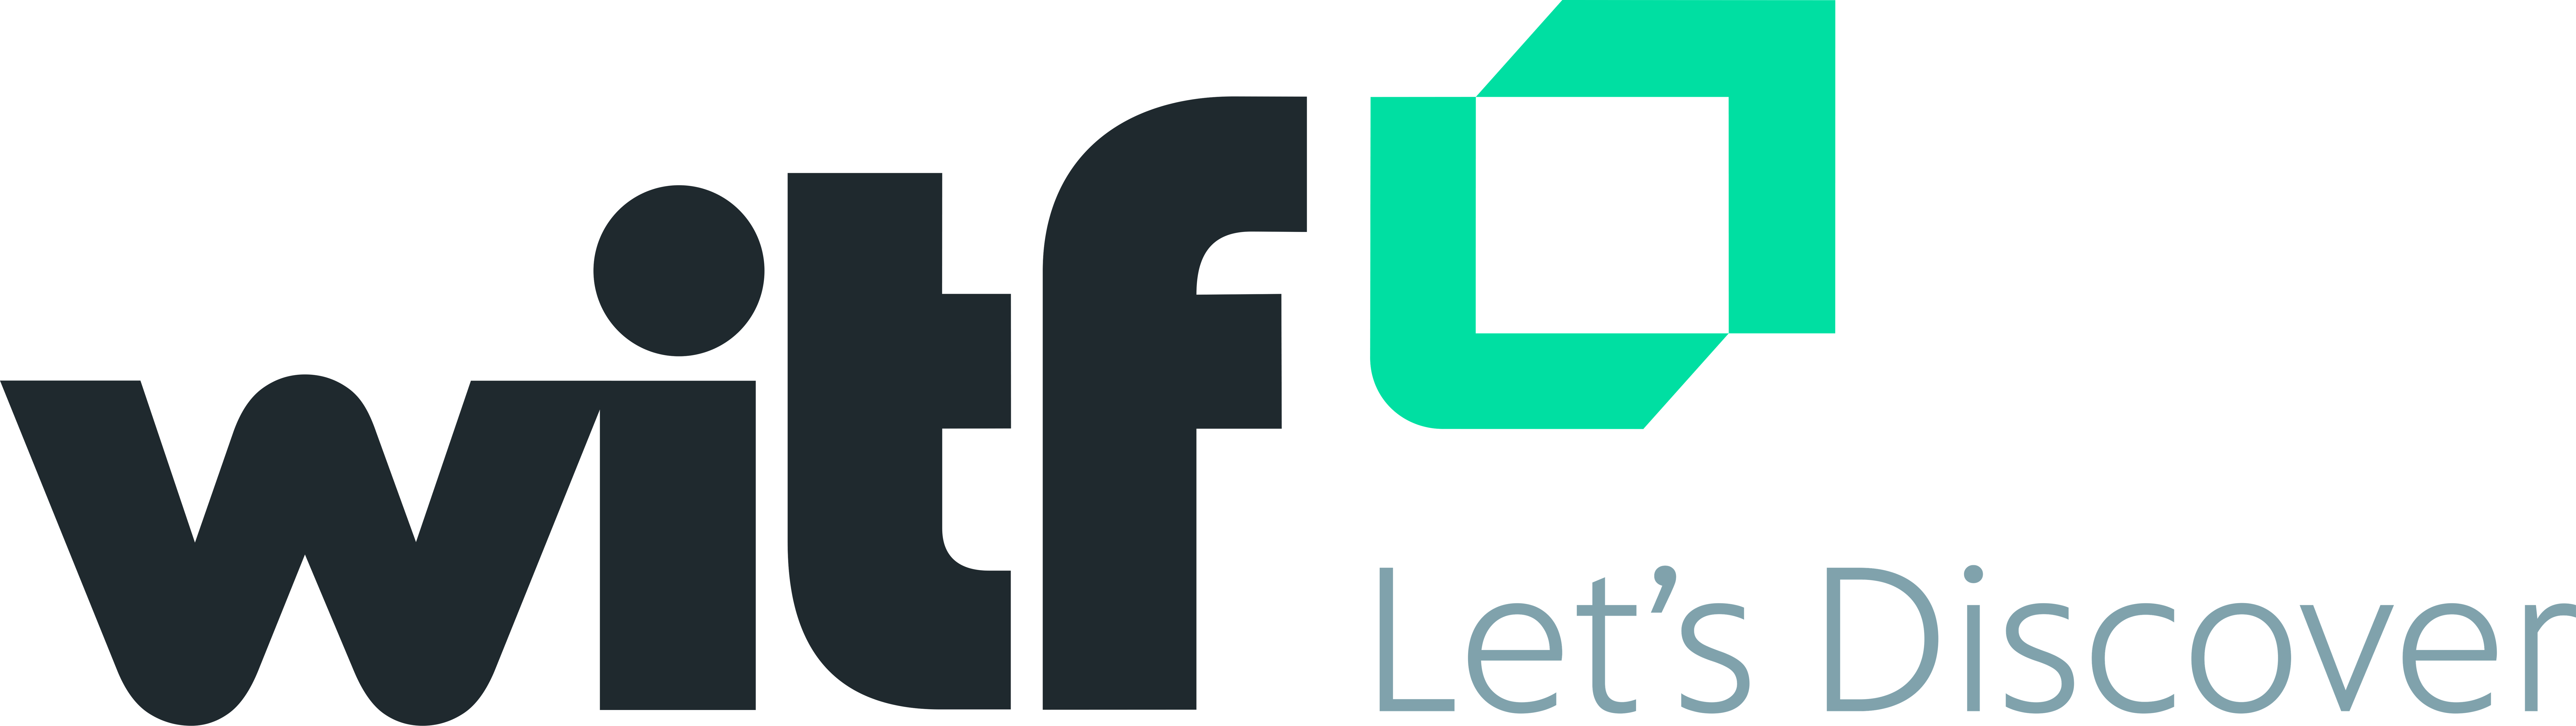 witf Let's Discover logo